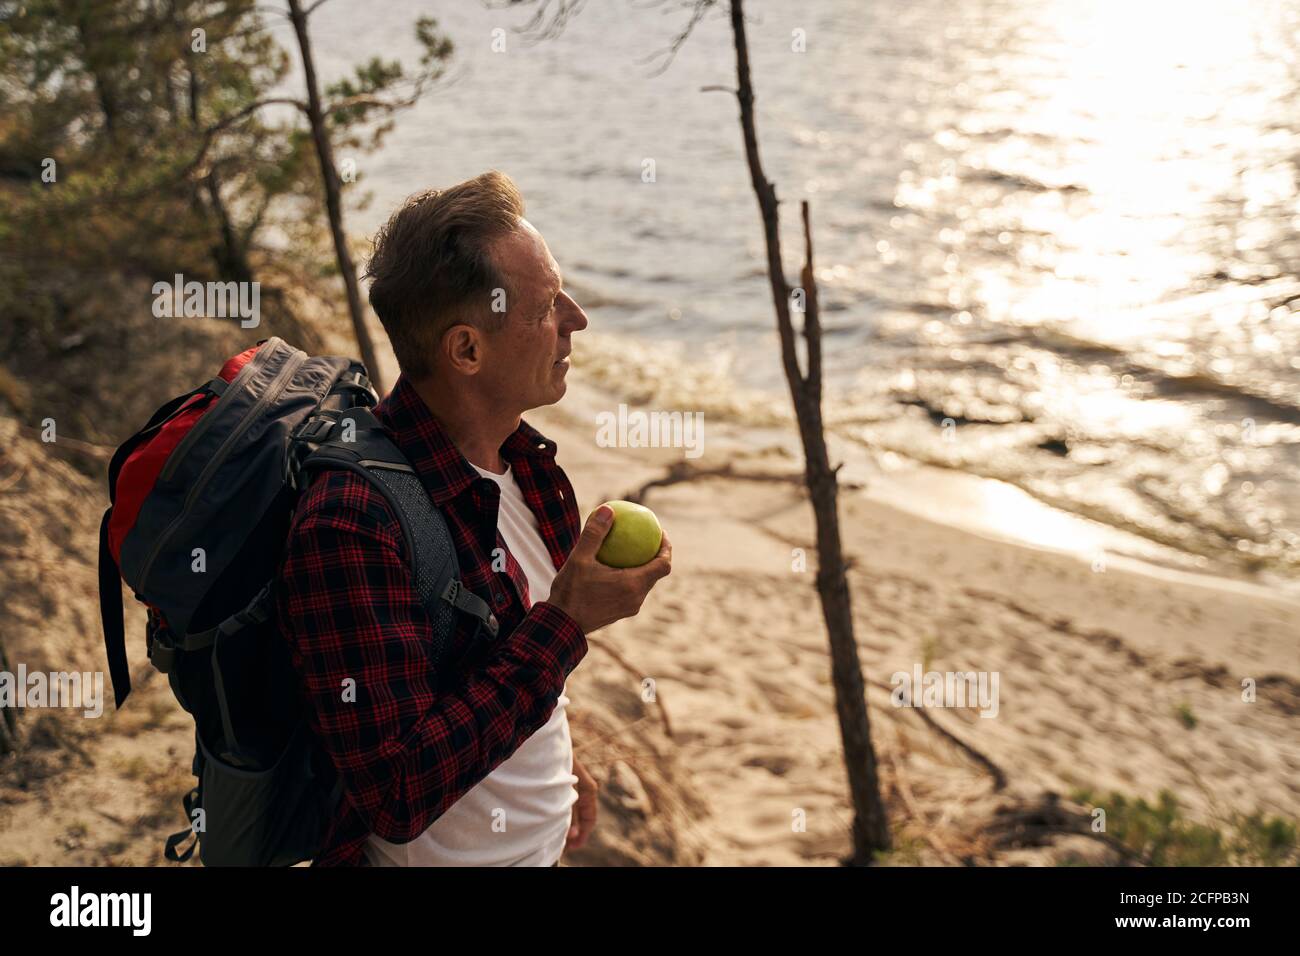 Man with apple going hiking near sea shore Stock Photo